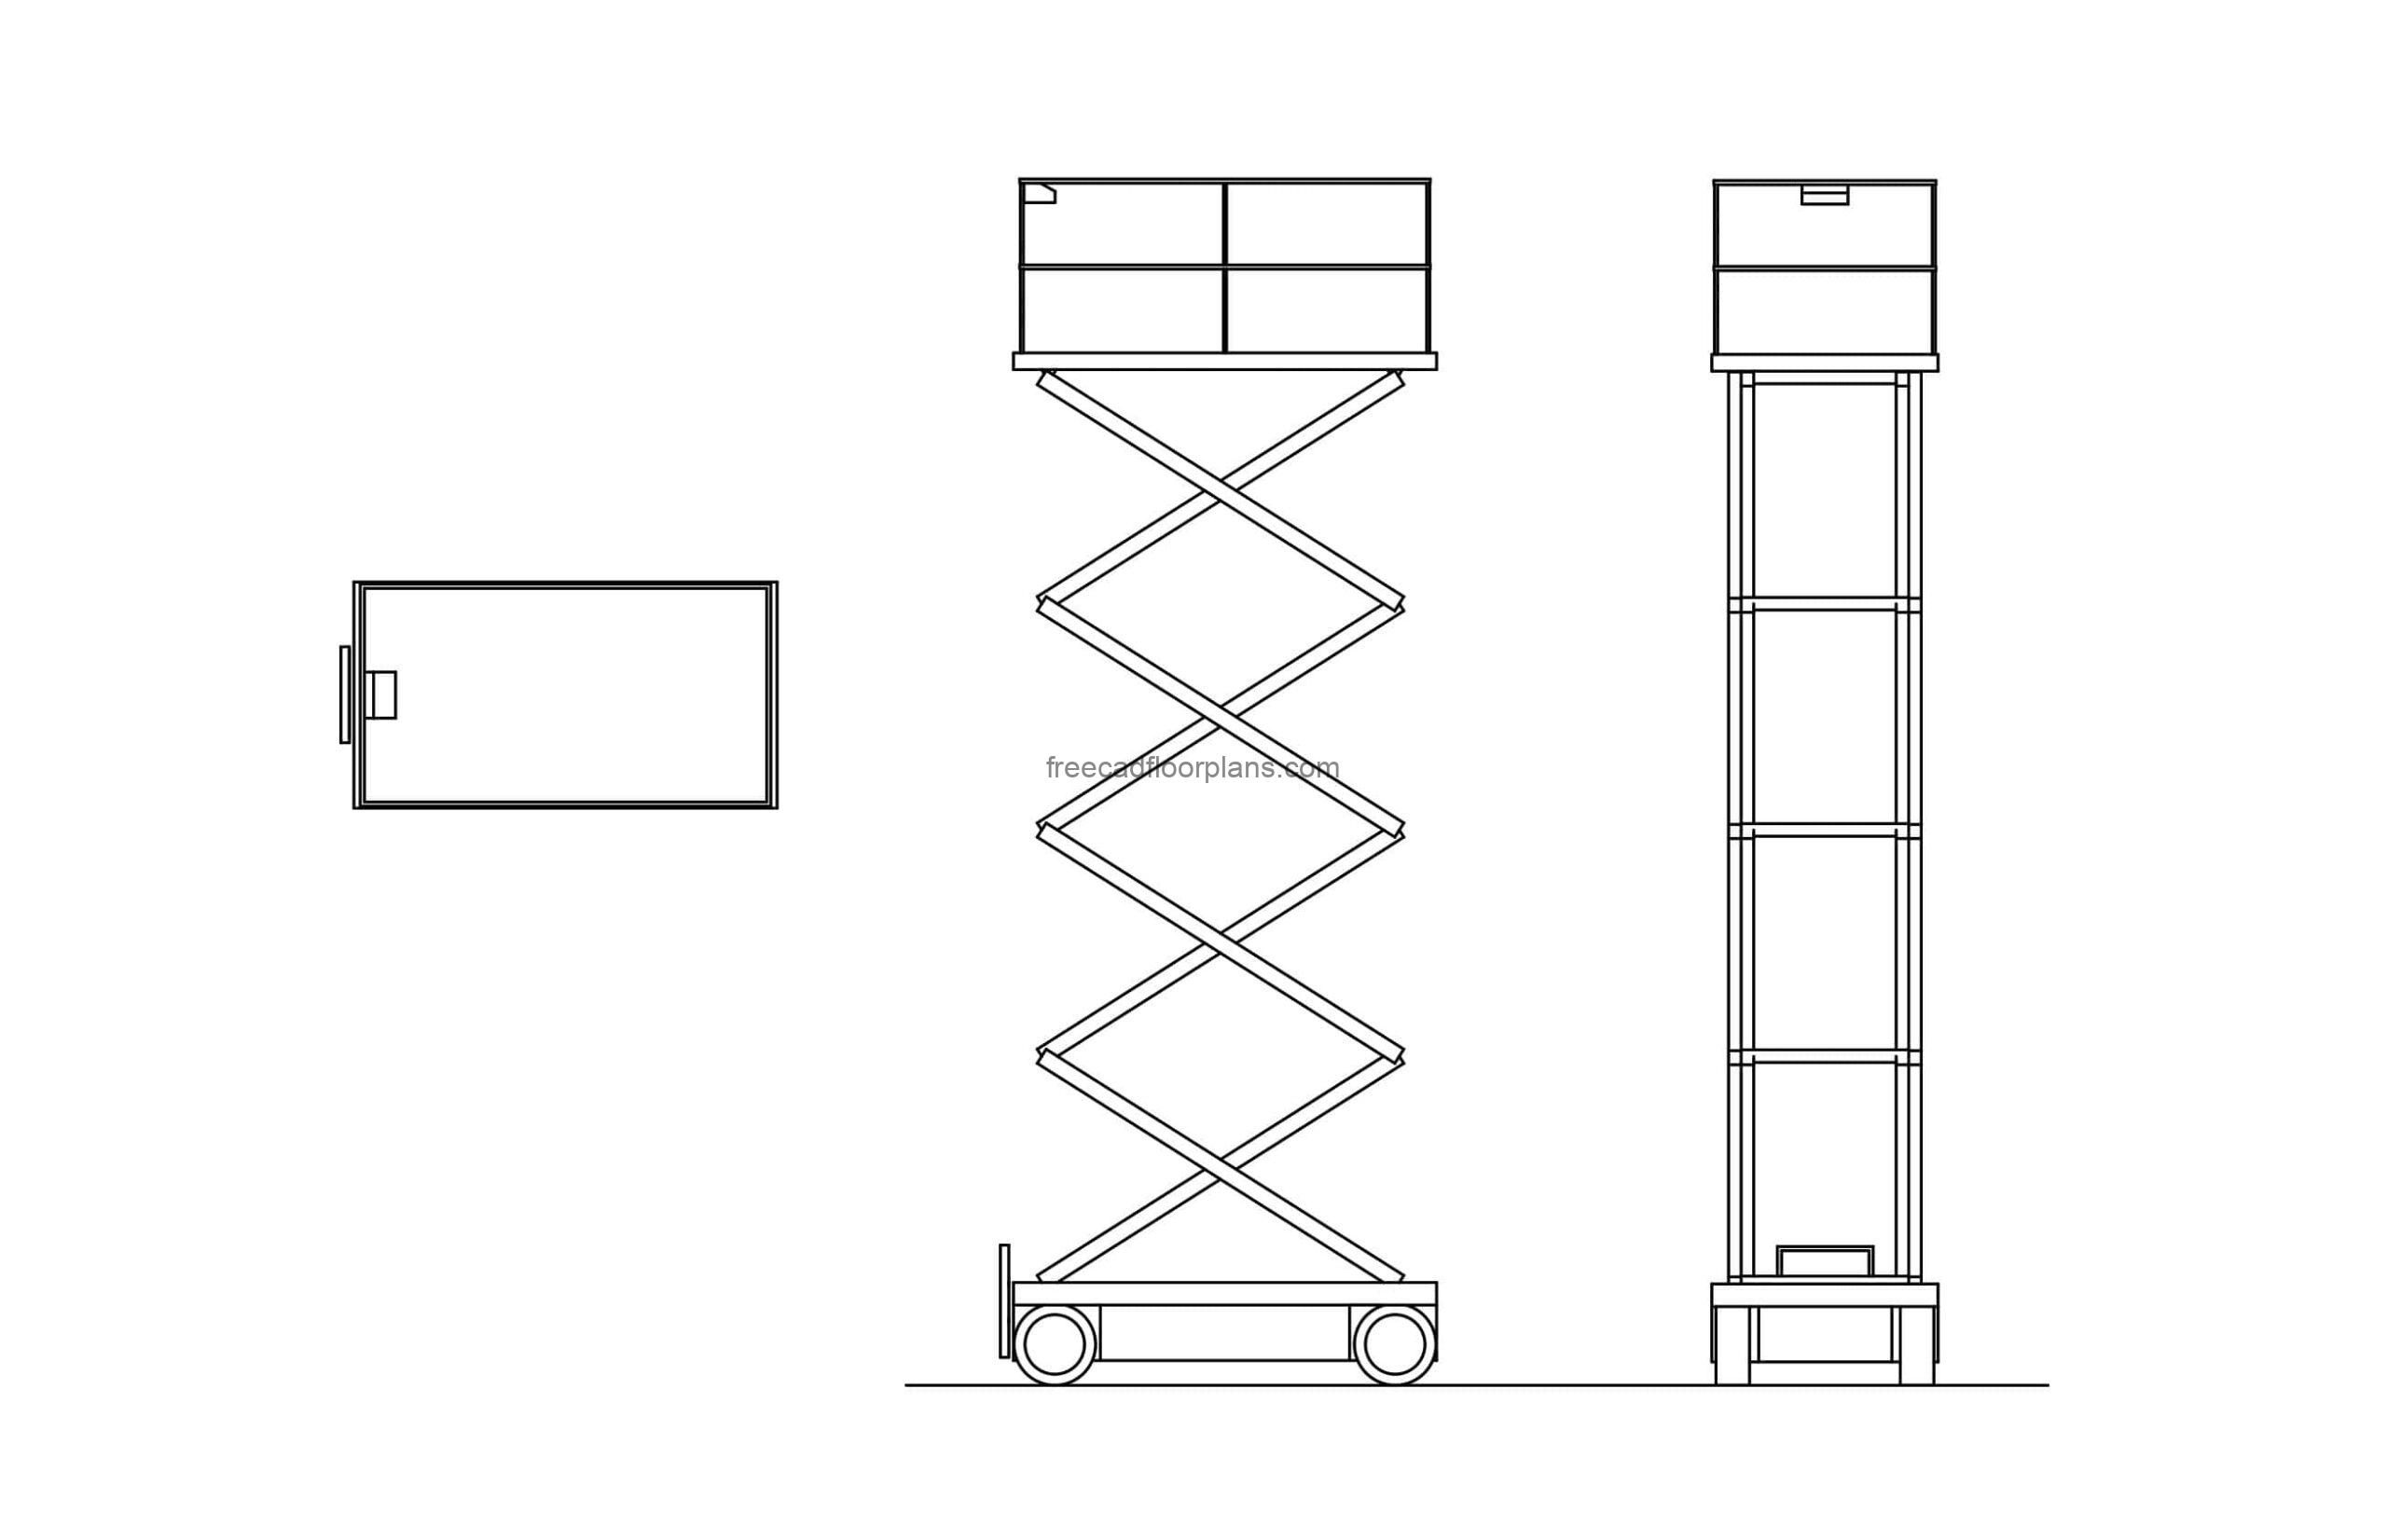 Scissor Lift cad block drawing, plan and side elevations views dwg model for free download